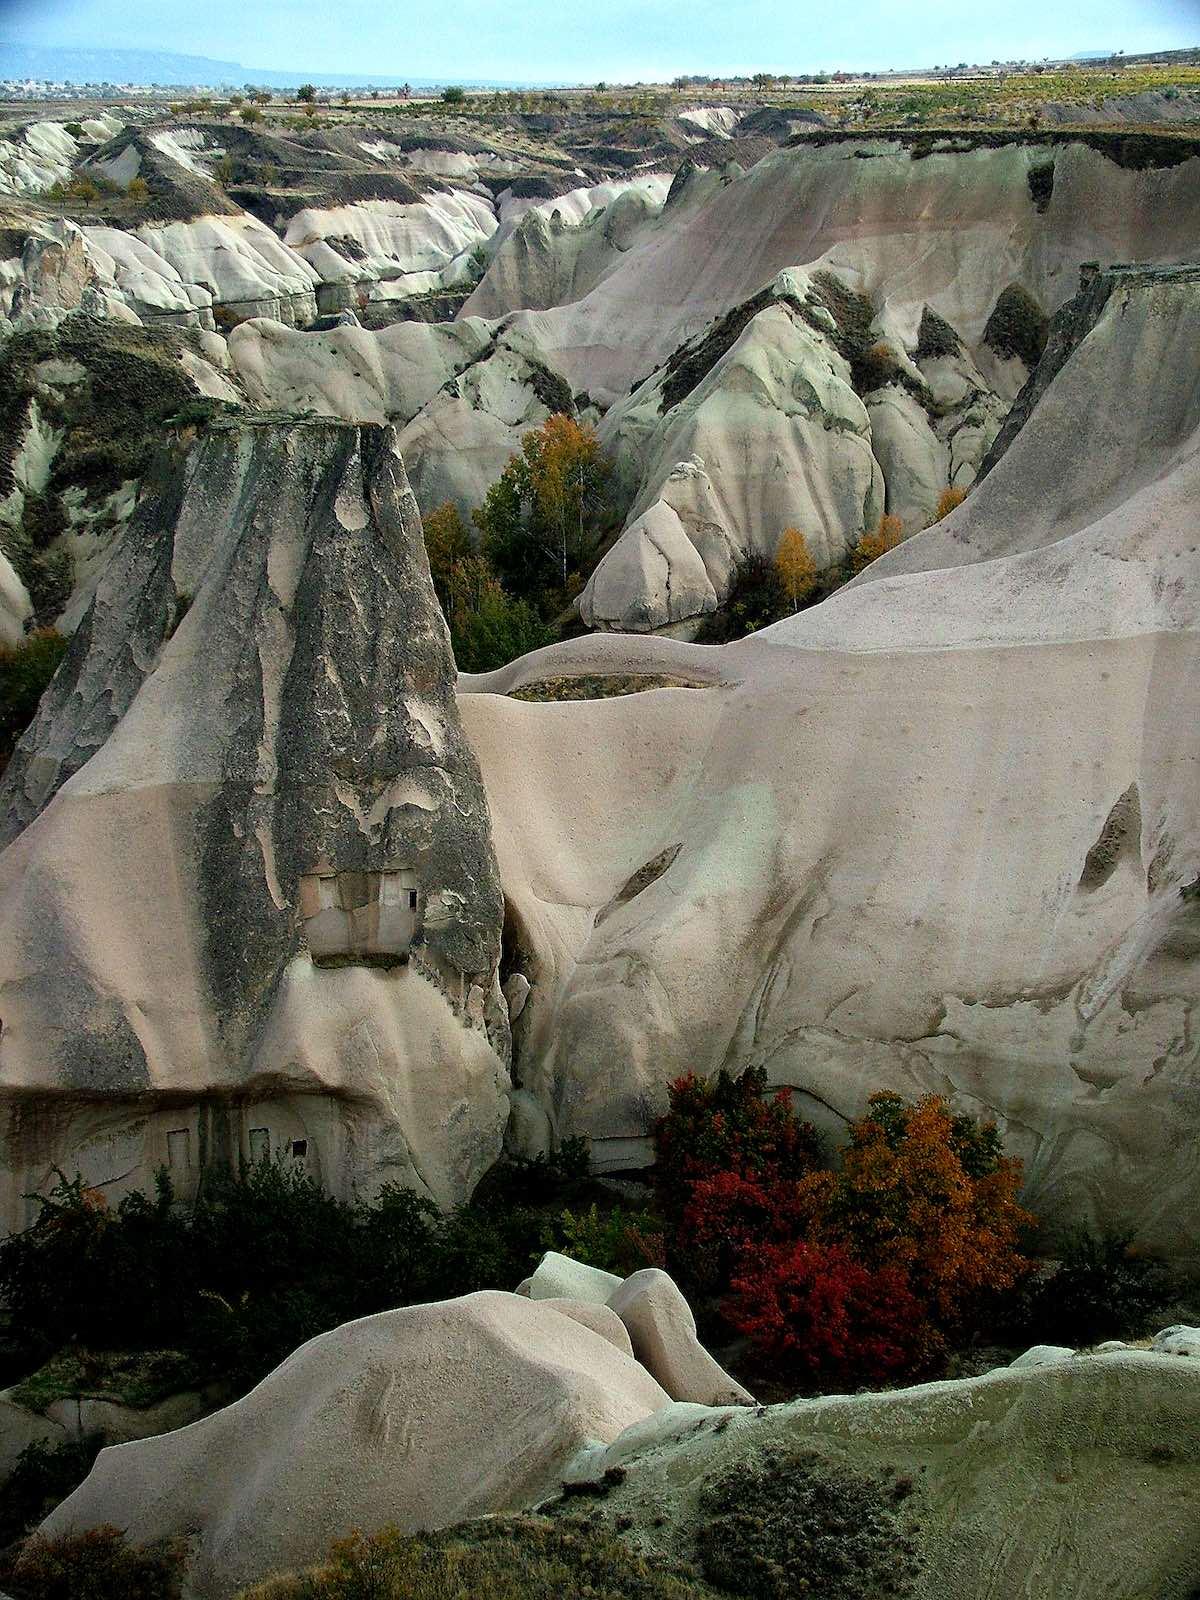 View of Göreme National Park's soft naturally-formed rocky slopes.